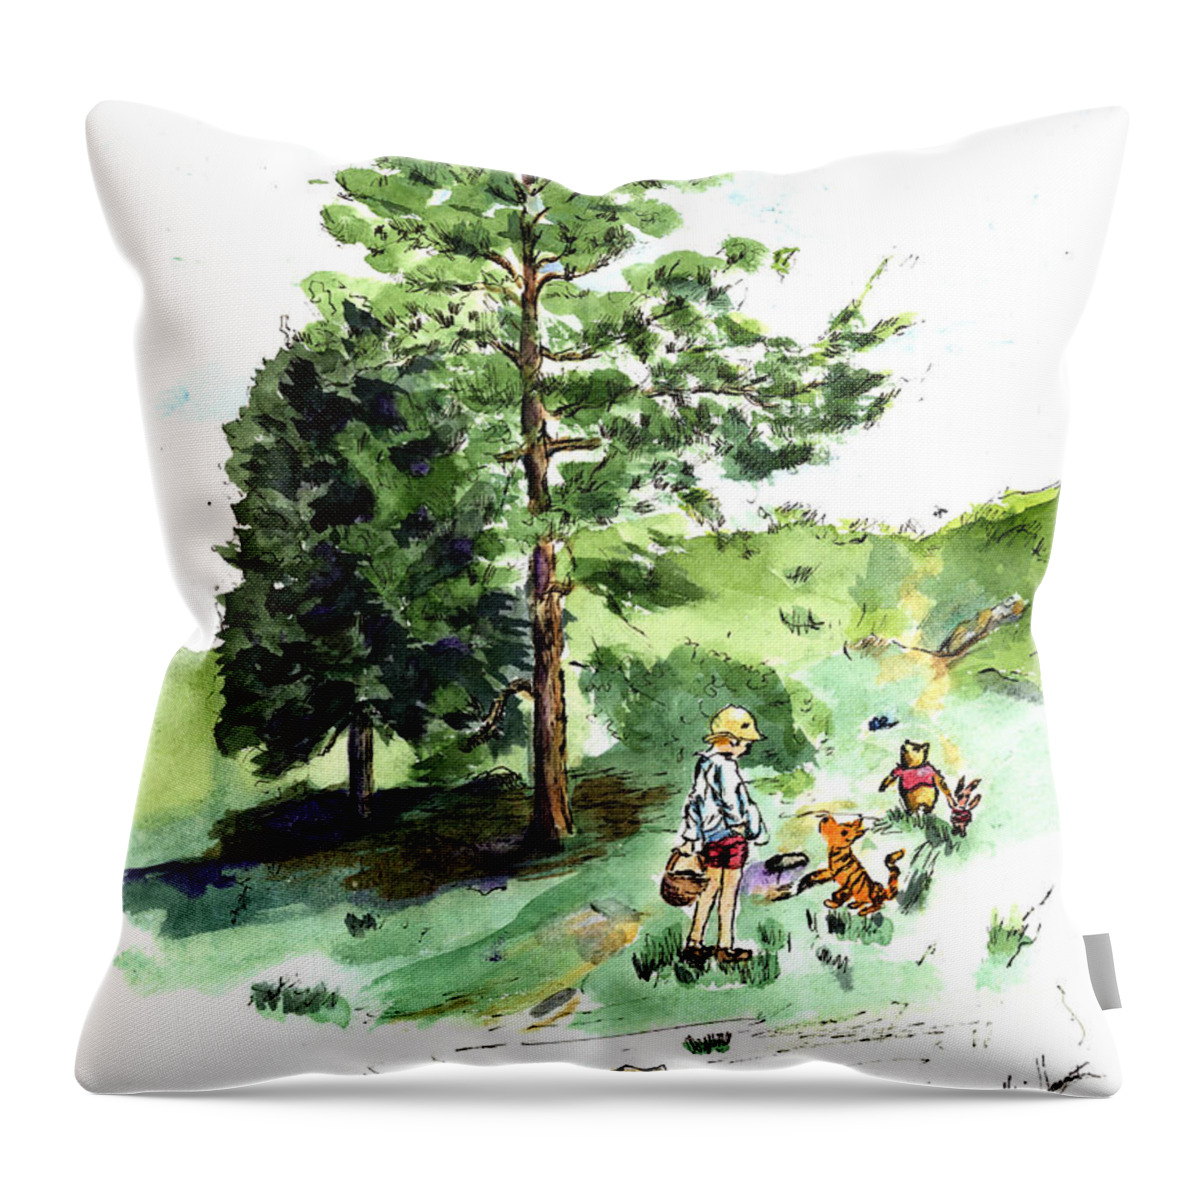 Winnie The Pooh Throw Pillow featuring the painting Winnie the Pooh with Christopher Robin after E H Shepard by Maria Hunt